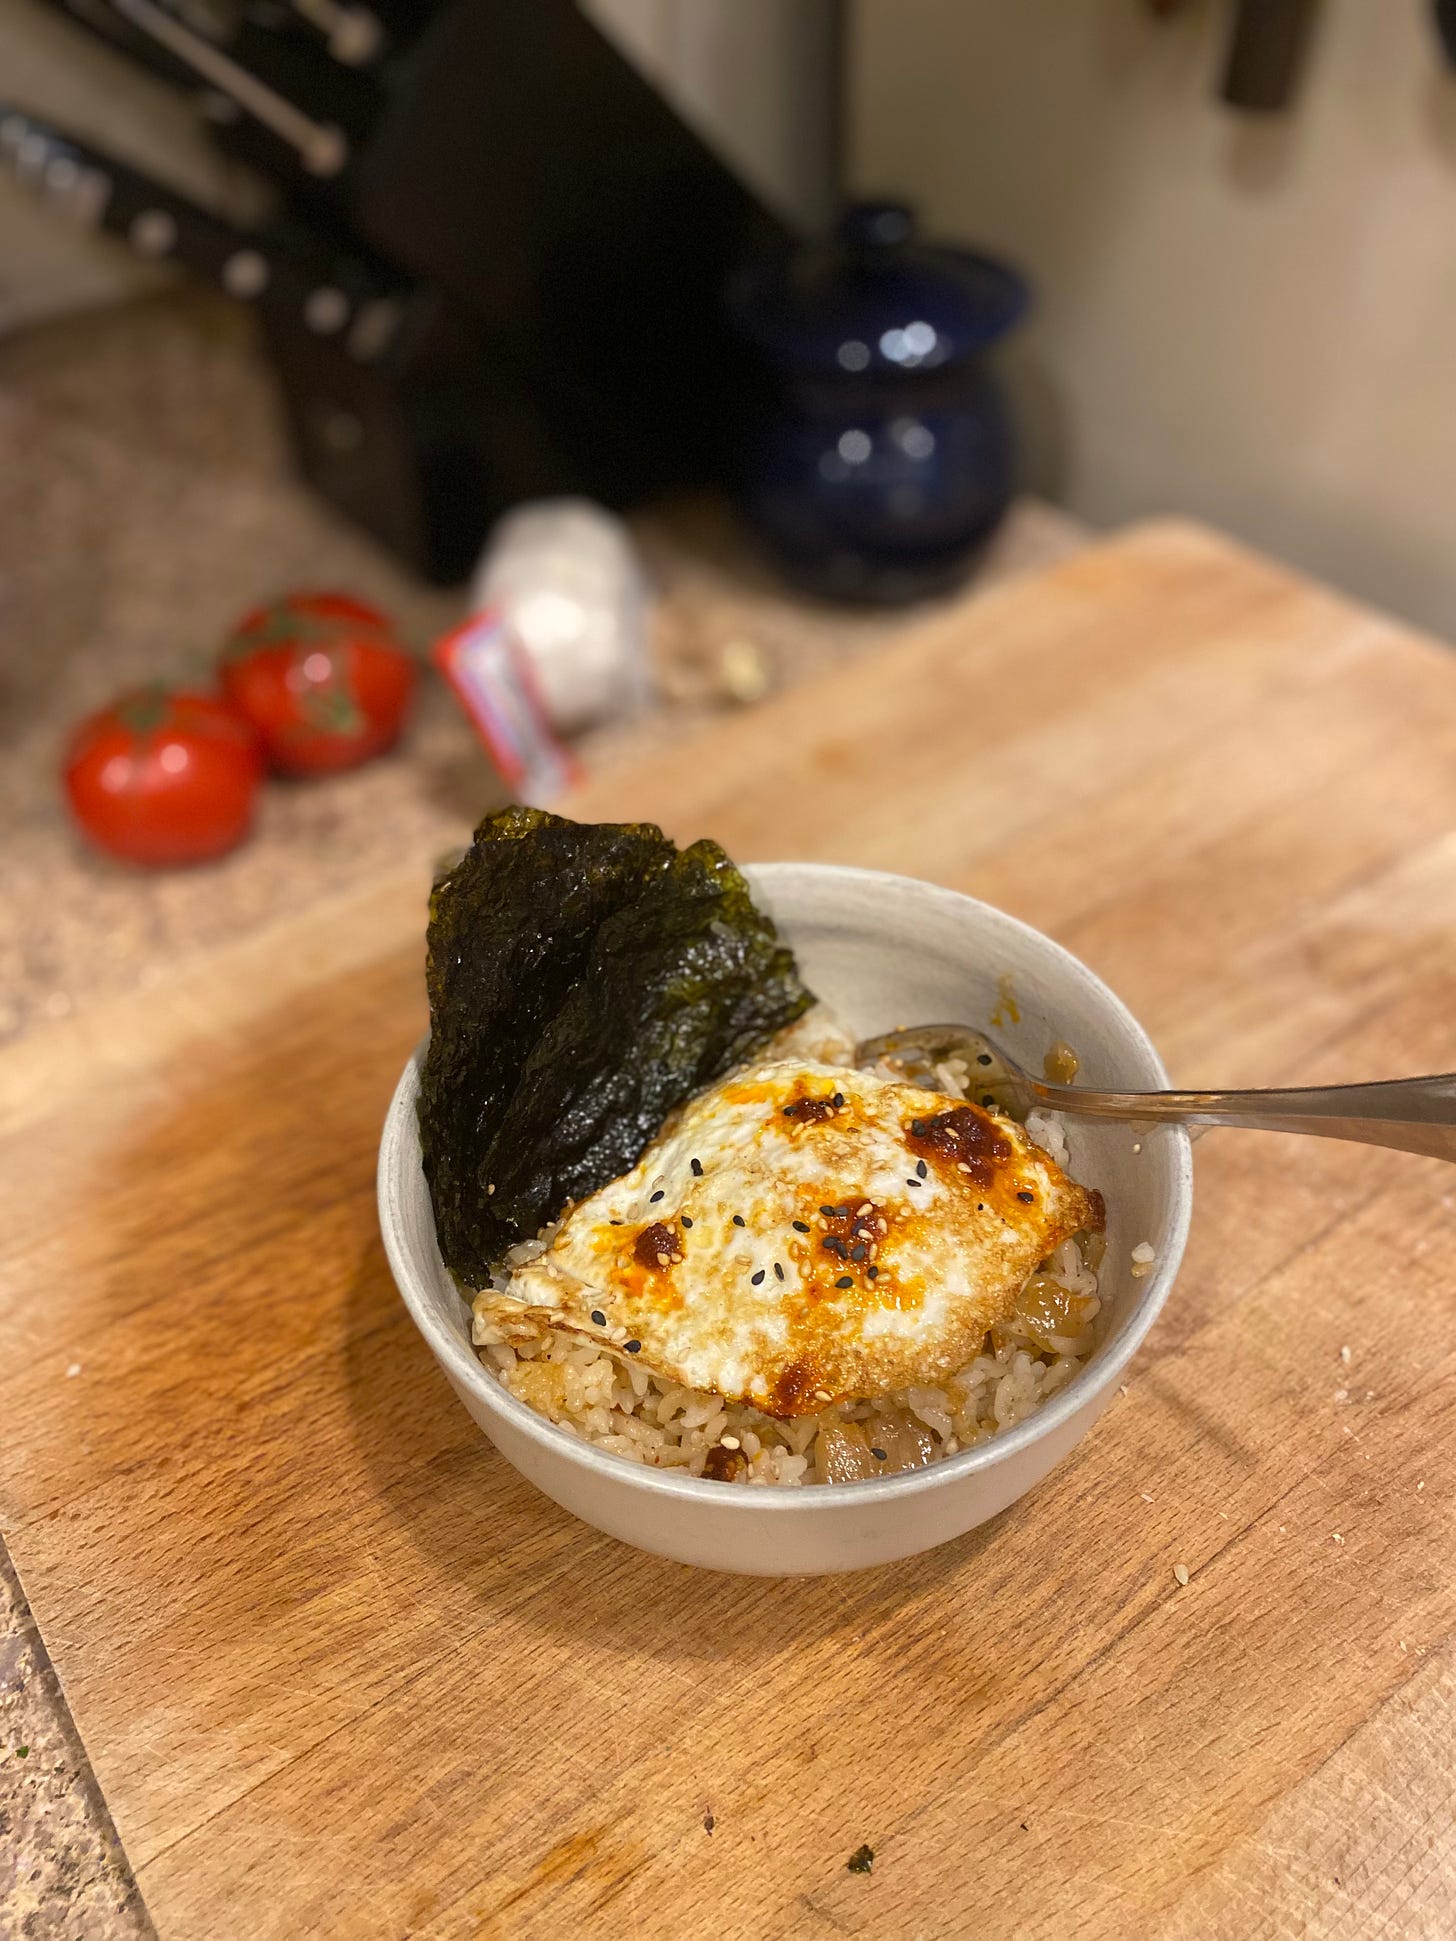 Sitting on a wood cutting board, an off-white bowl of fried rice topped with an over easy egg. It's garnished with chili miso and two colours of sesame seeds, and a few sheets of gim fanned at the side of the bowl. A fork sticks out on the right hand side.